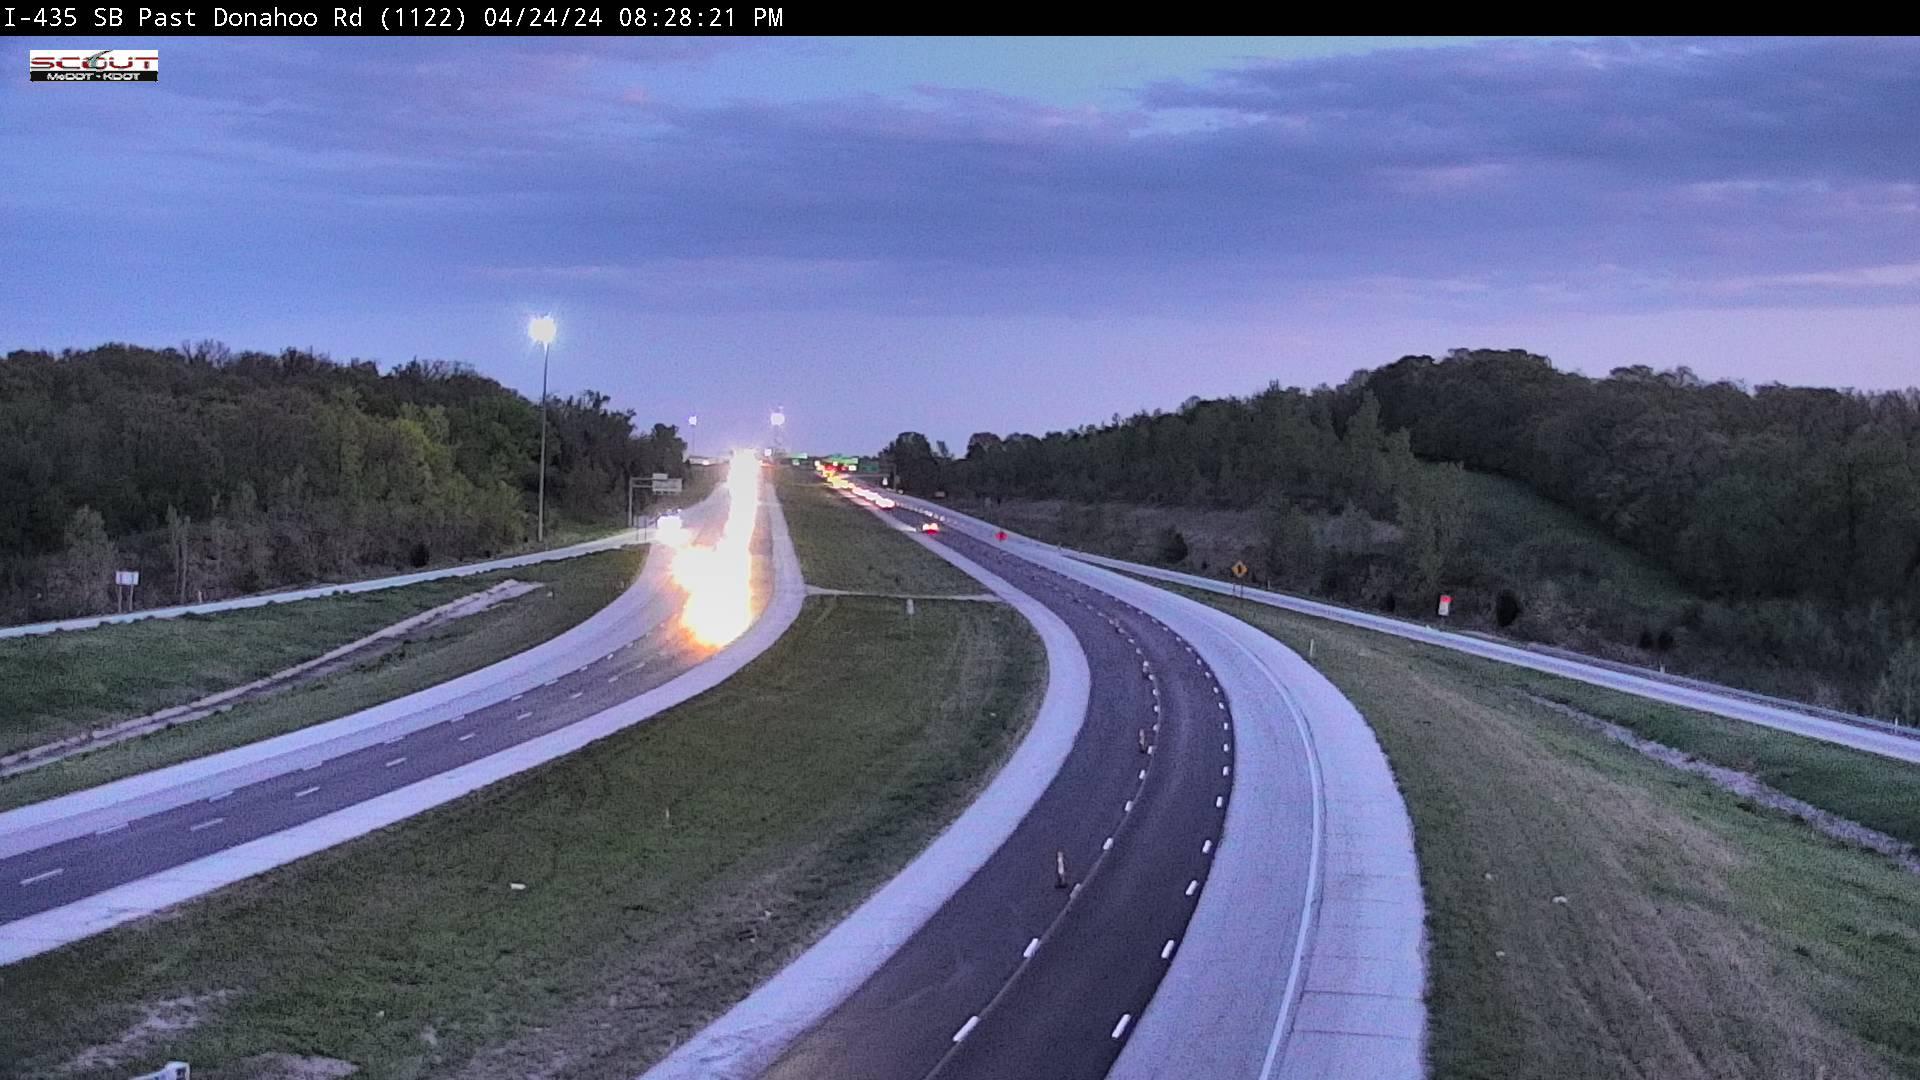 Traffic Cam Kansas City: I- S @ After Donahoo Road Player